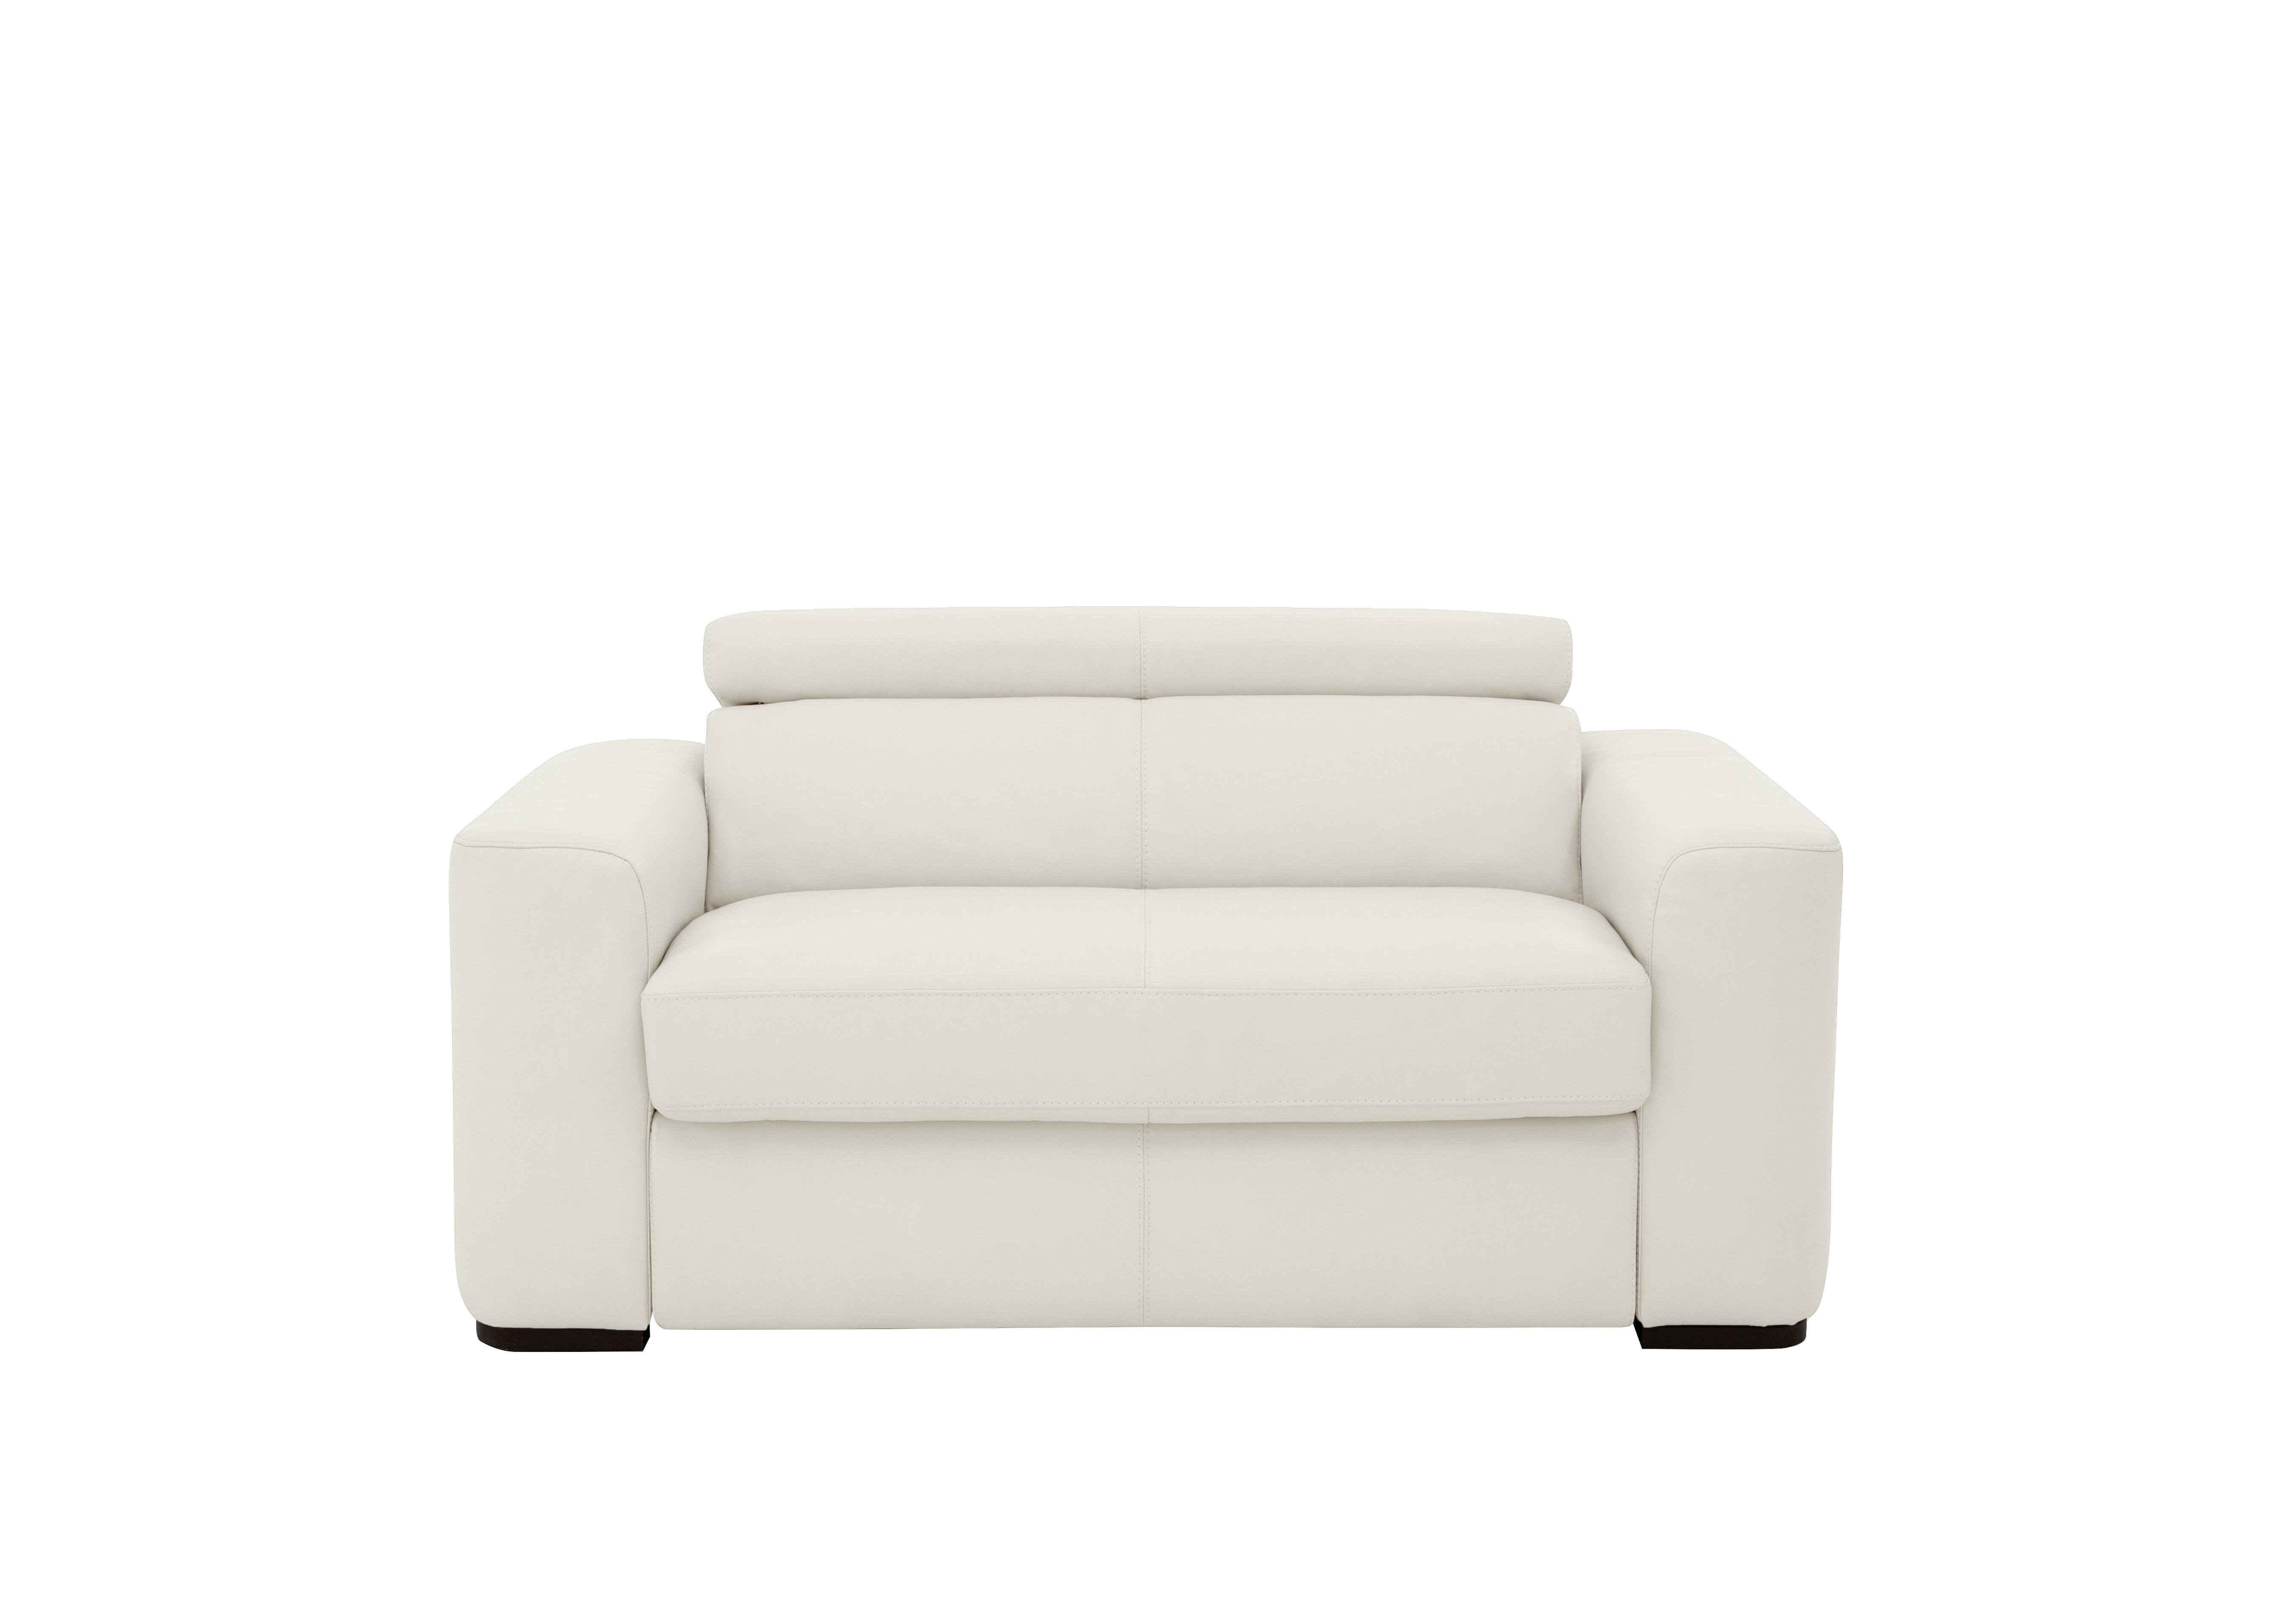 Infinity Leather Chair Sofabed in Bv-156e Frost on Furniture Village